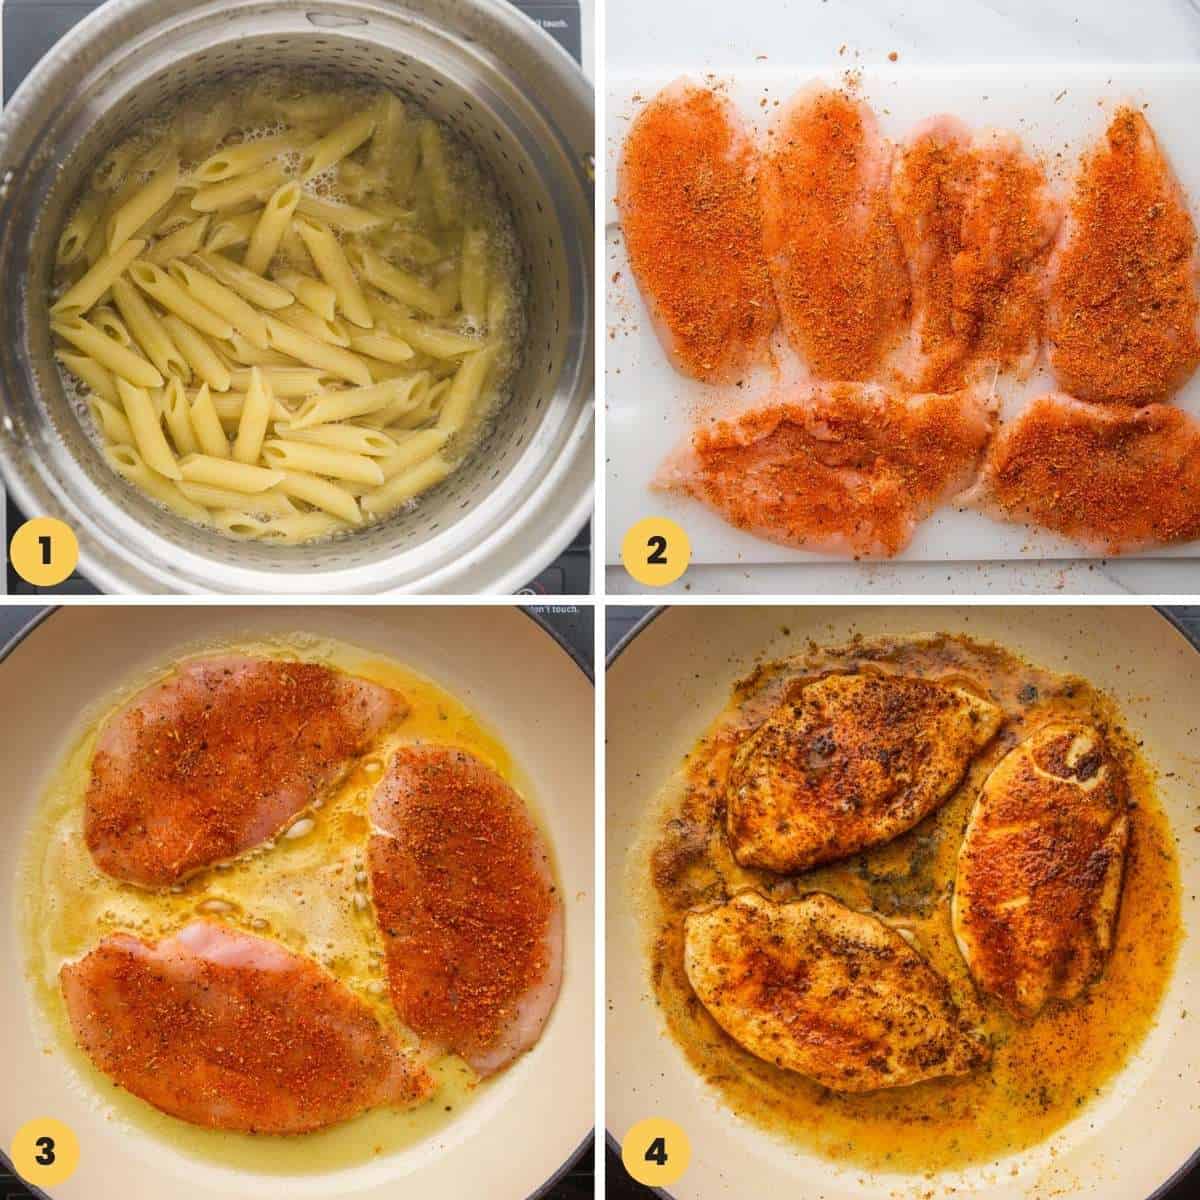 four images showing how to make pasta and pan fry cajun chicken cutlets